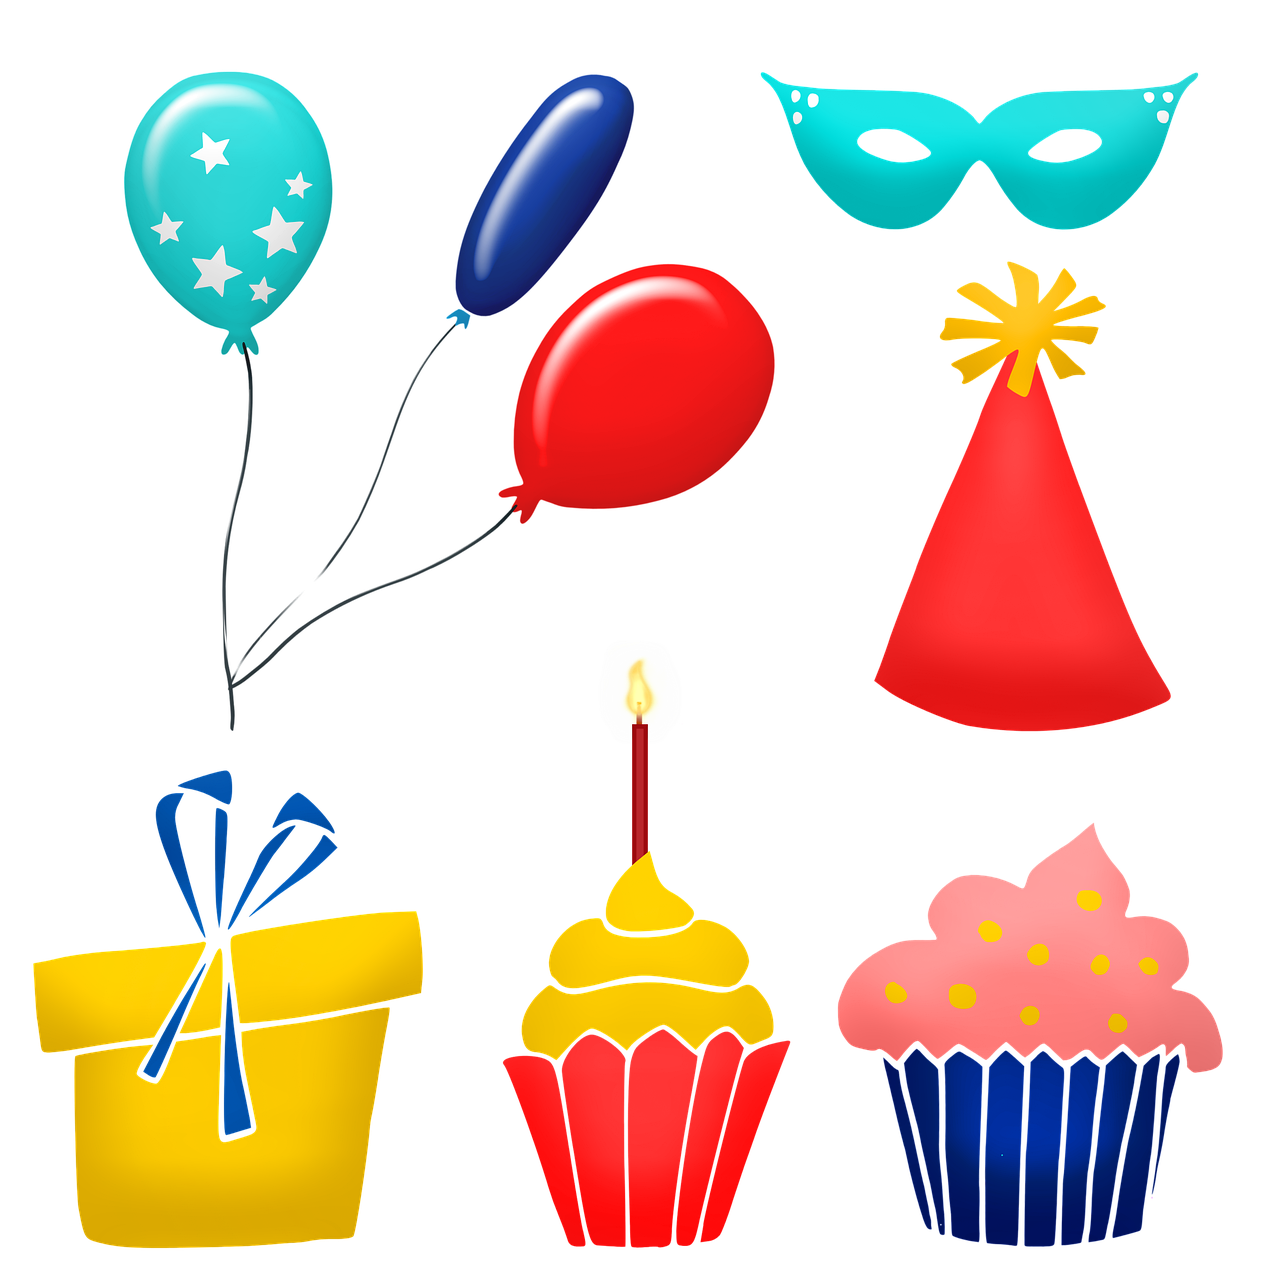 a bunch of cupcakes and balloons on a black background, a digital rendering, clipart icon, masks, having a cool party, future!!